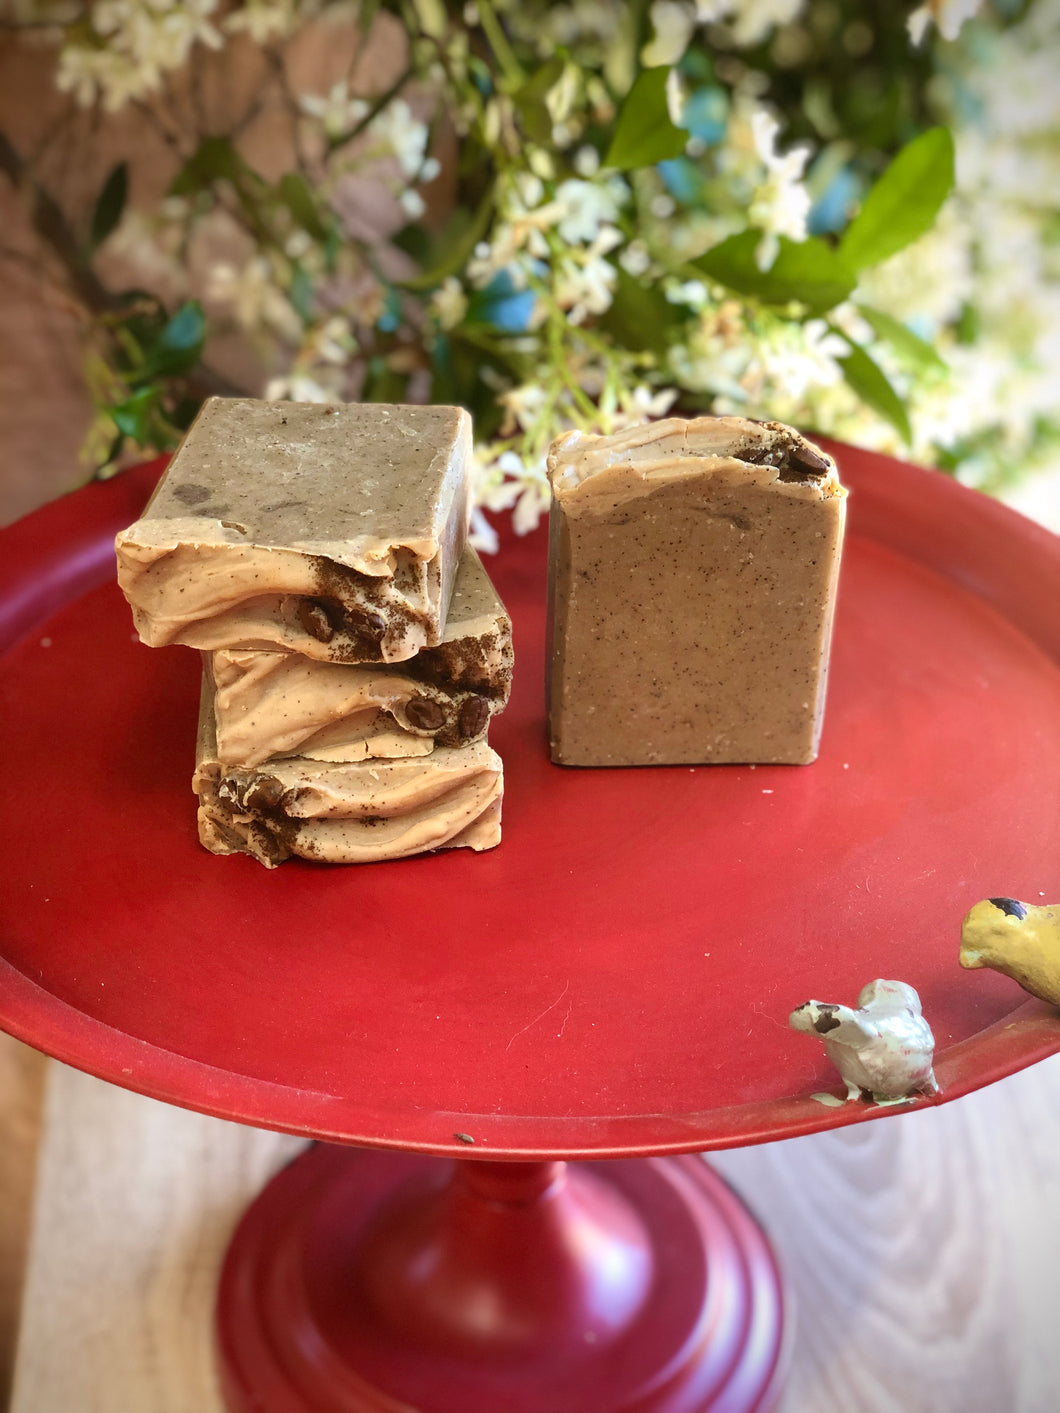 DETOX ΣΑΠΟΥΝΙ ΚΑΤΑ ΤΗΣ ΚΥΤΤΑΡΙΤΙΔΑΣ ΜΕ ΚΑΦΕ / ANTICELLULITE DETOX SOAP WITH COFFEE / Vo2